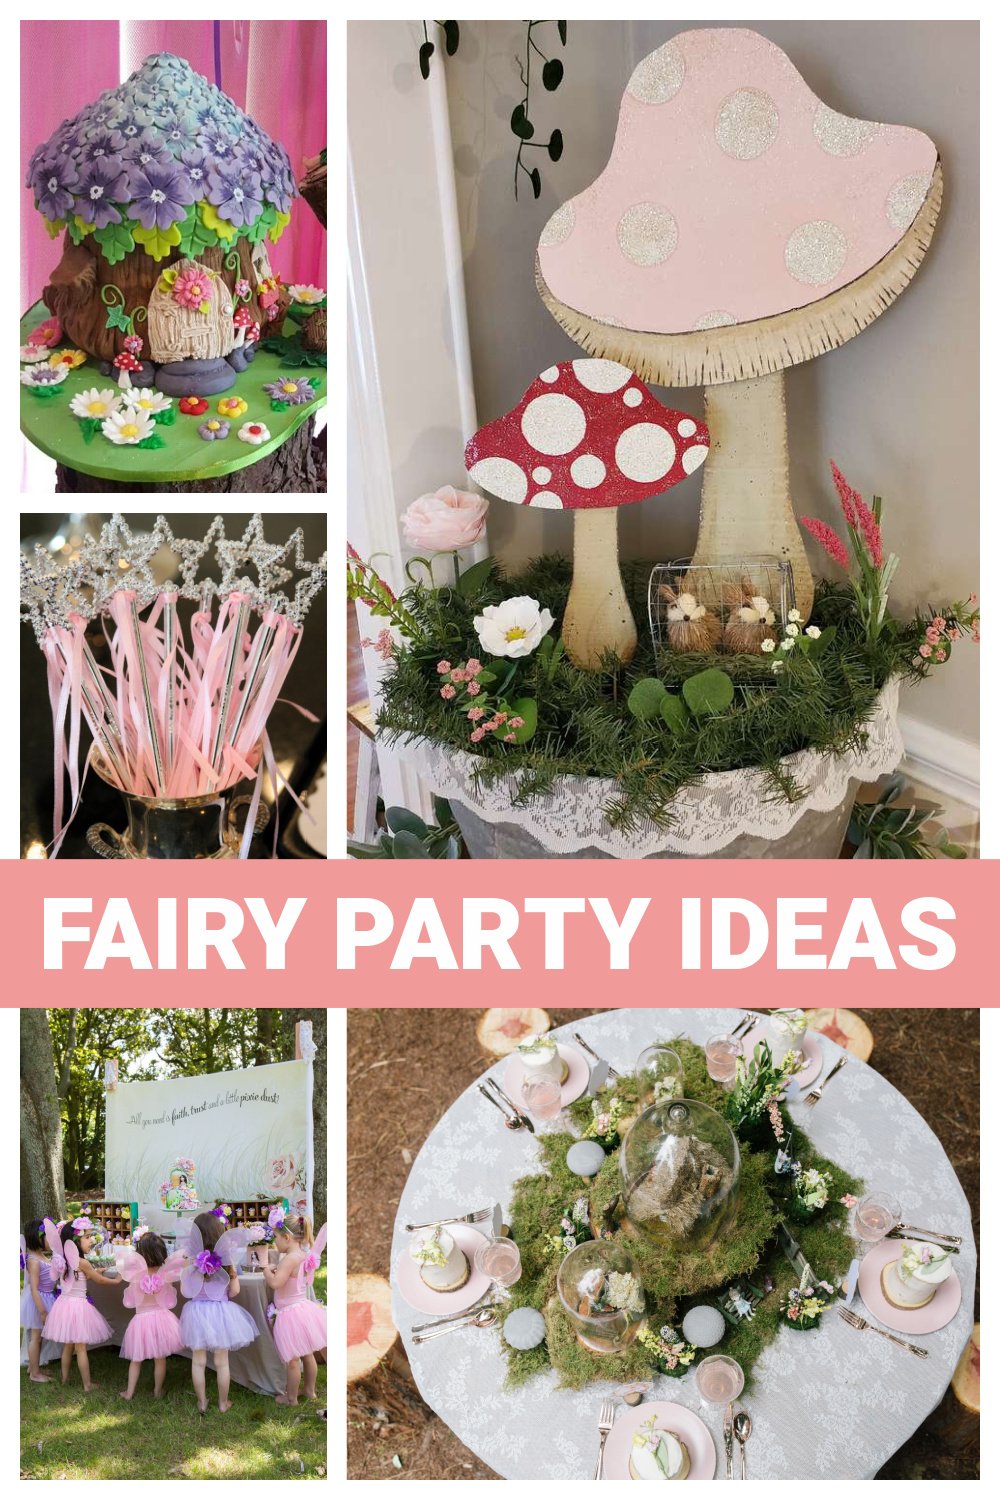 21 Fabulous Fairy Party Ideas on Pretty My Party